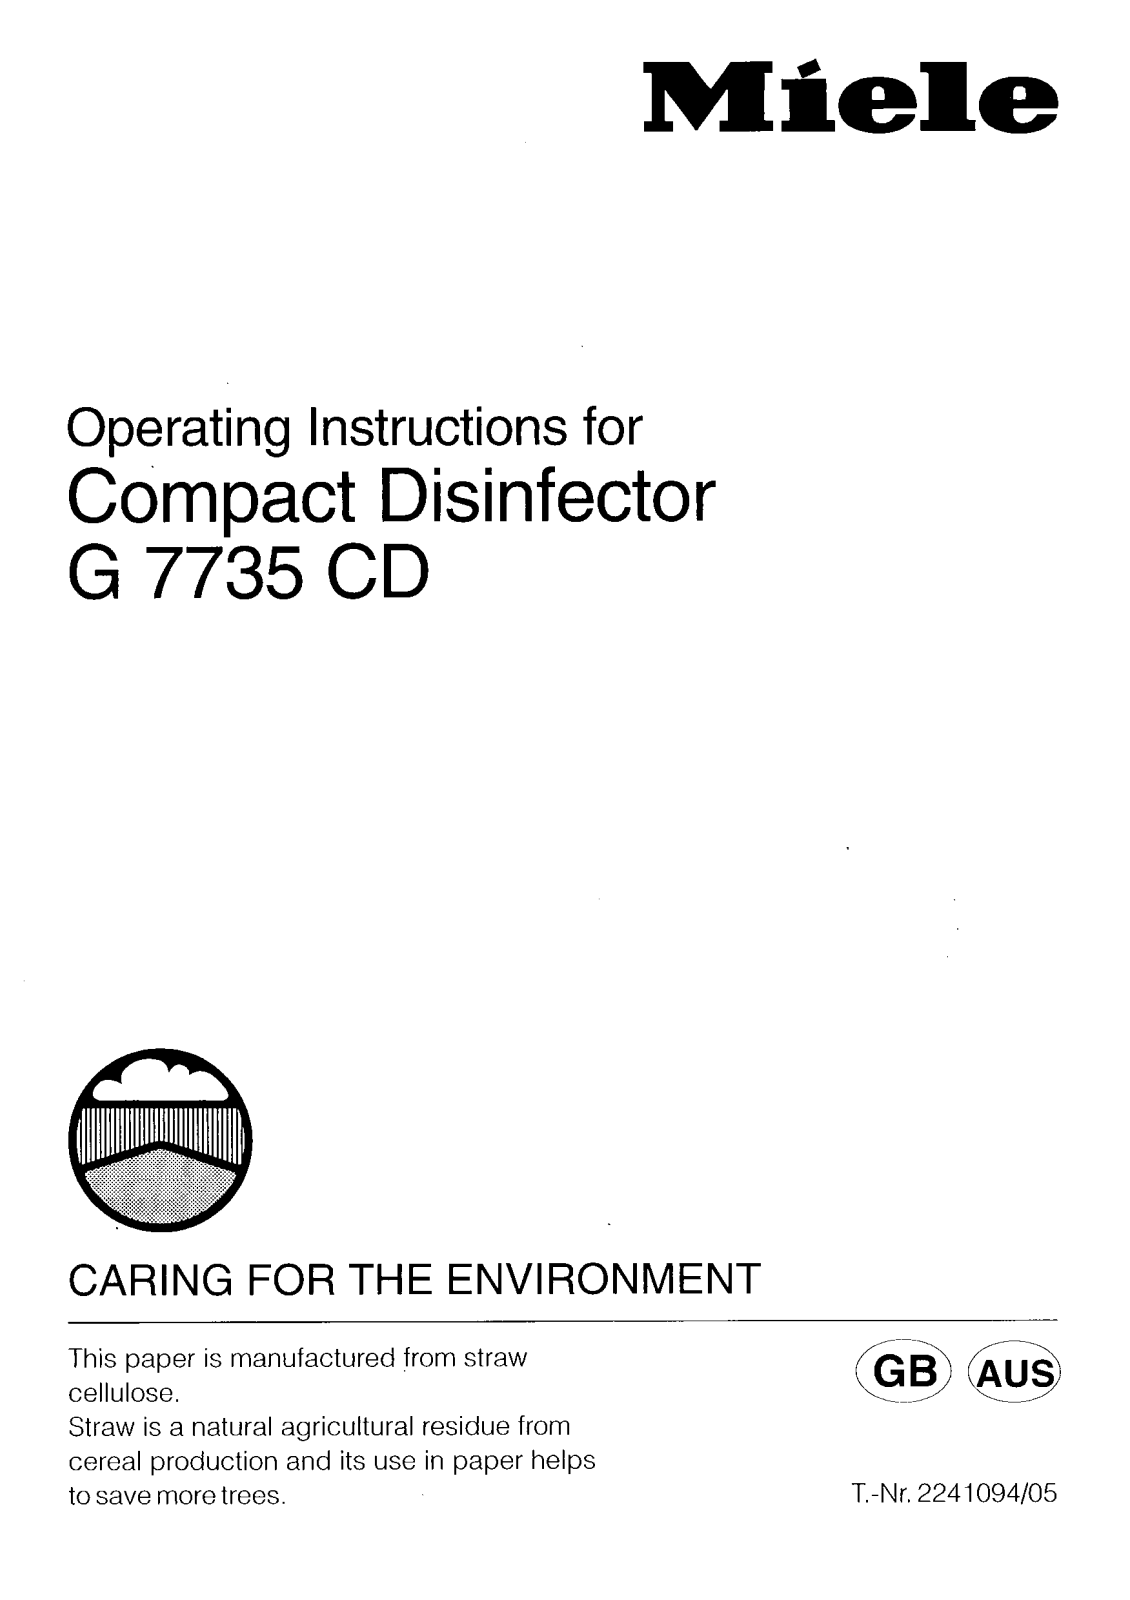 Miele G 7735 CD Operating instructions